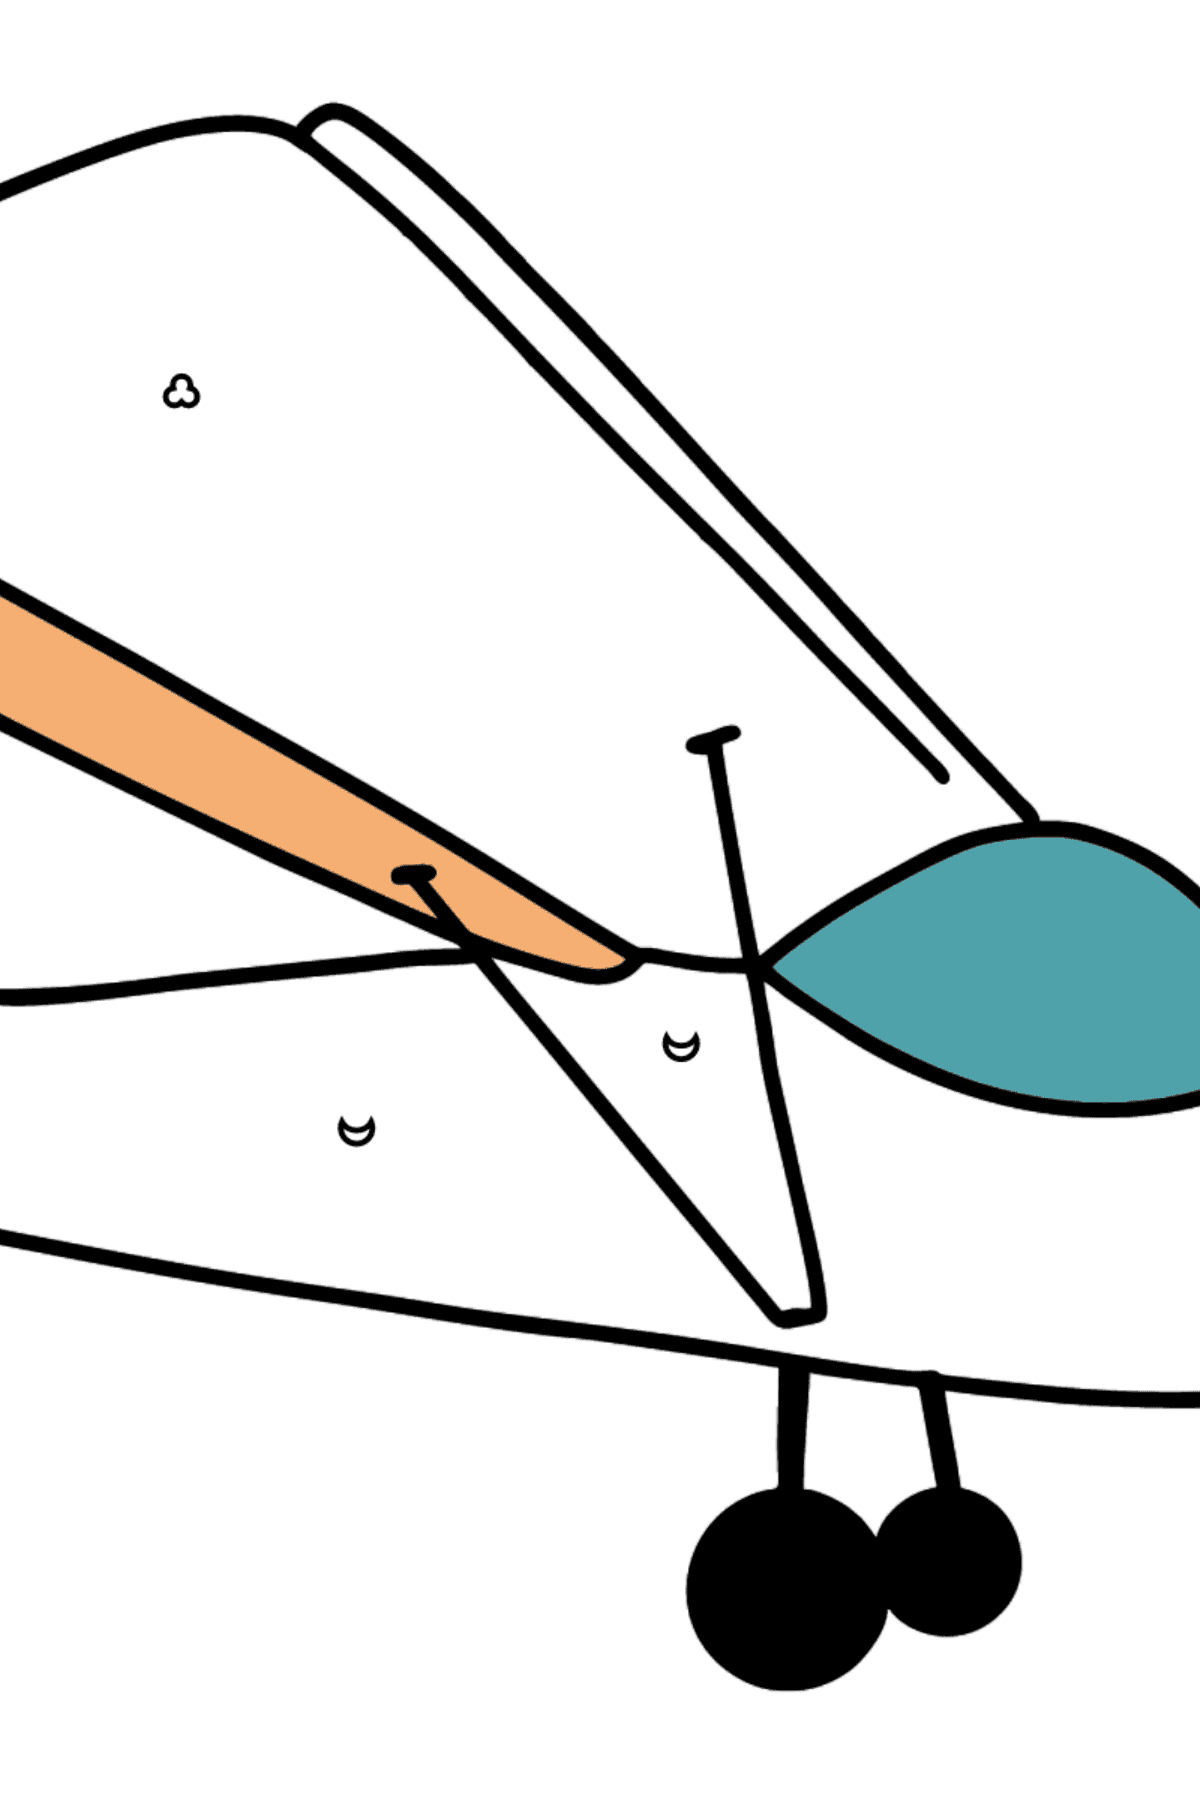 Small Plane coloring page - Coloring by Geometric Shapes for Kids